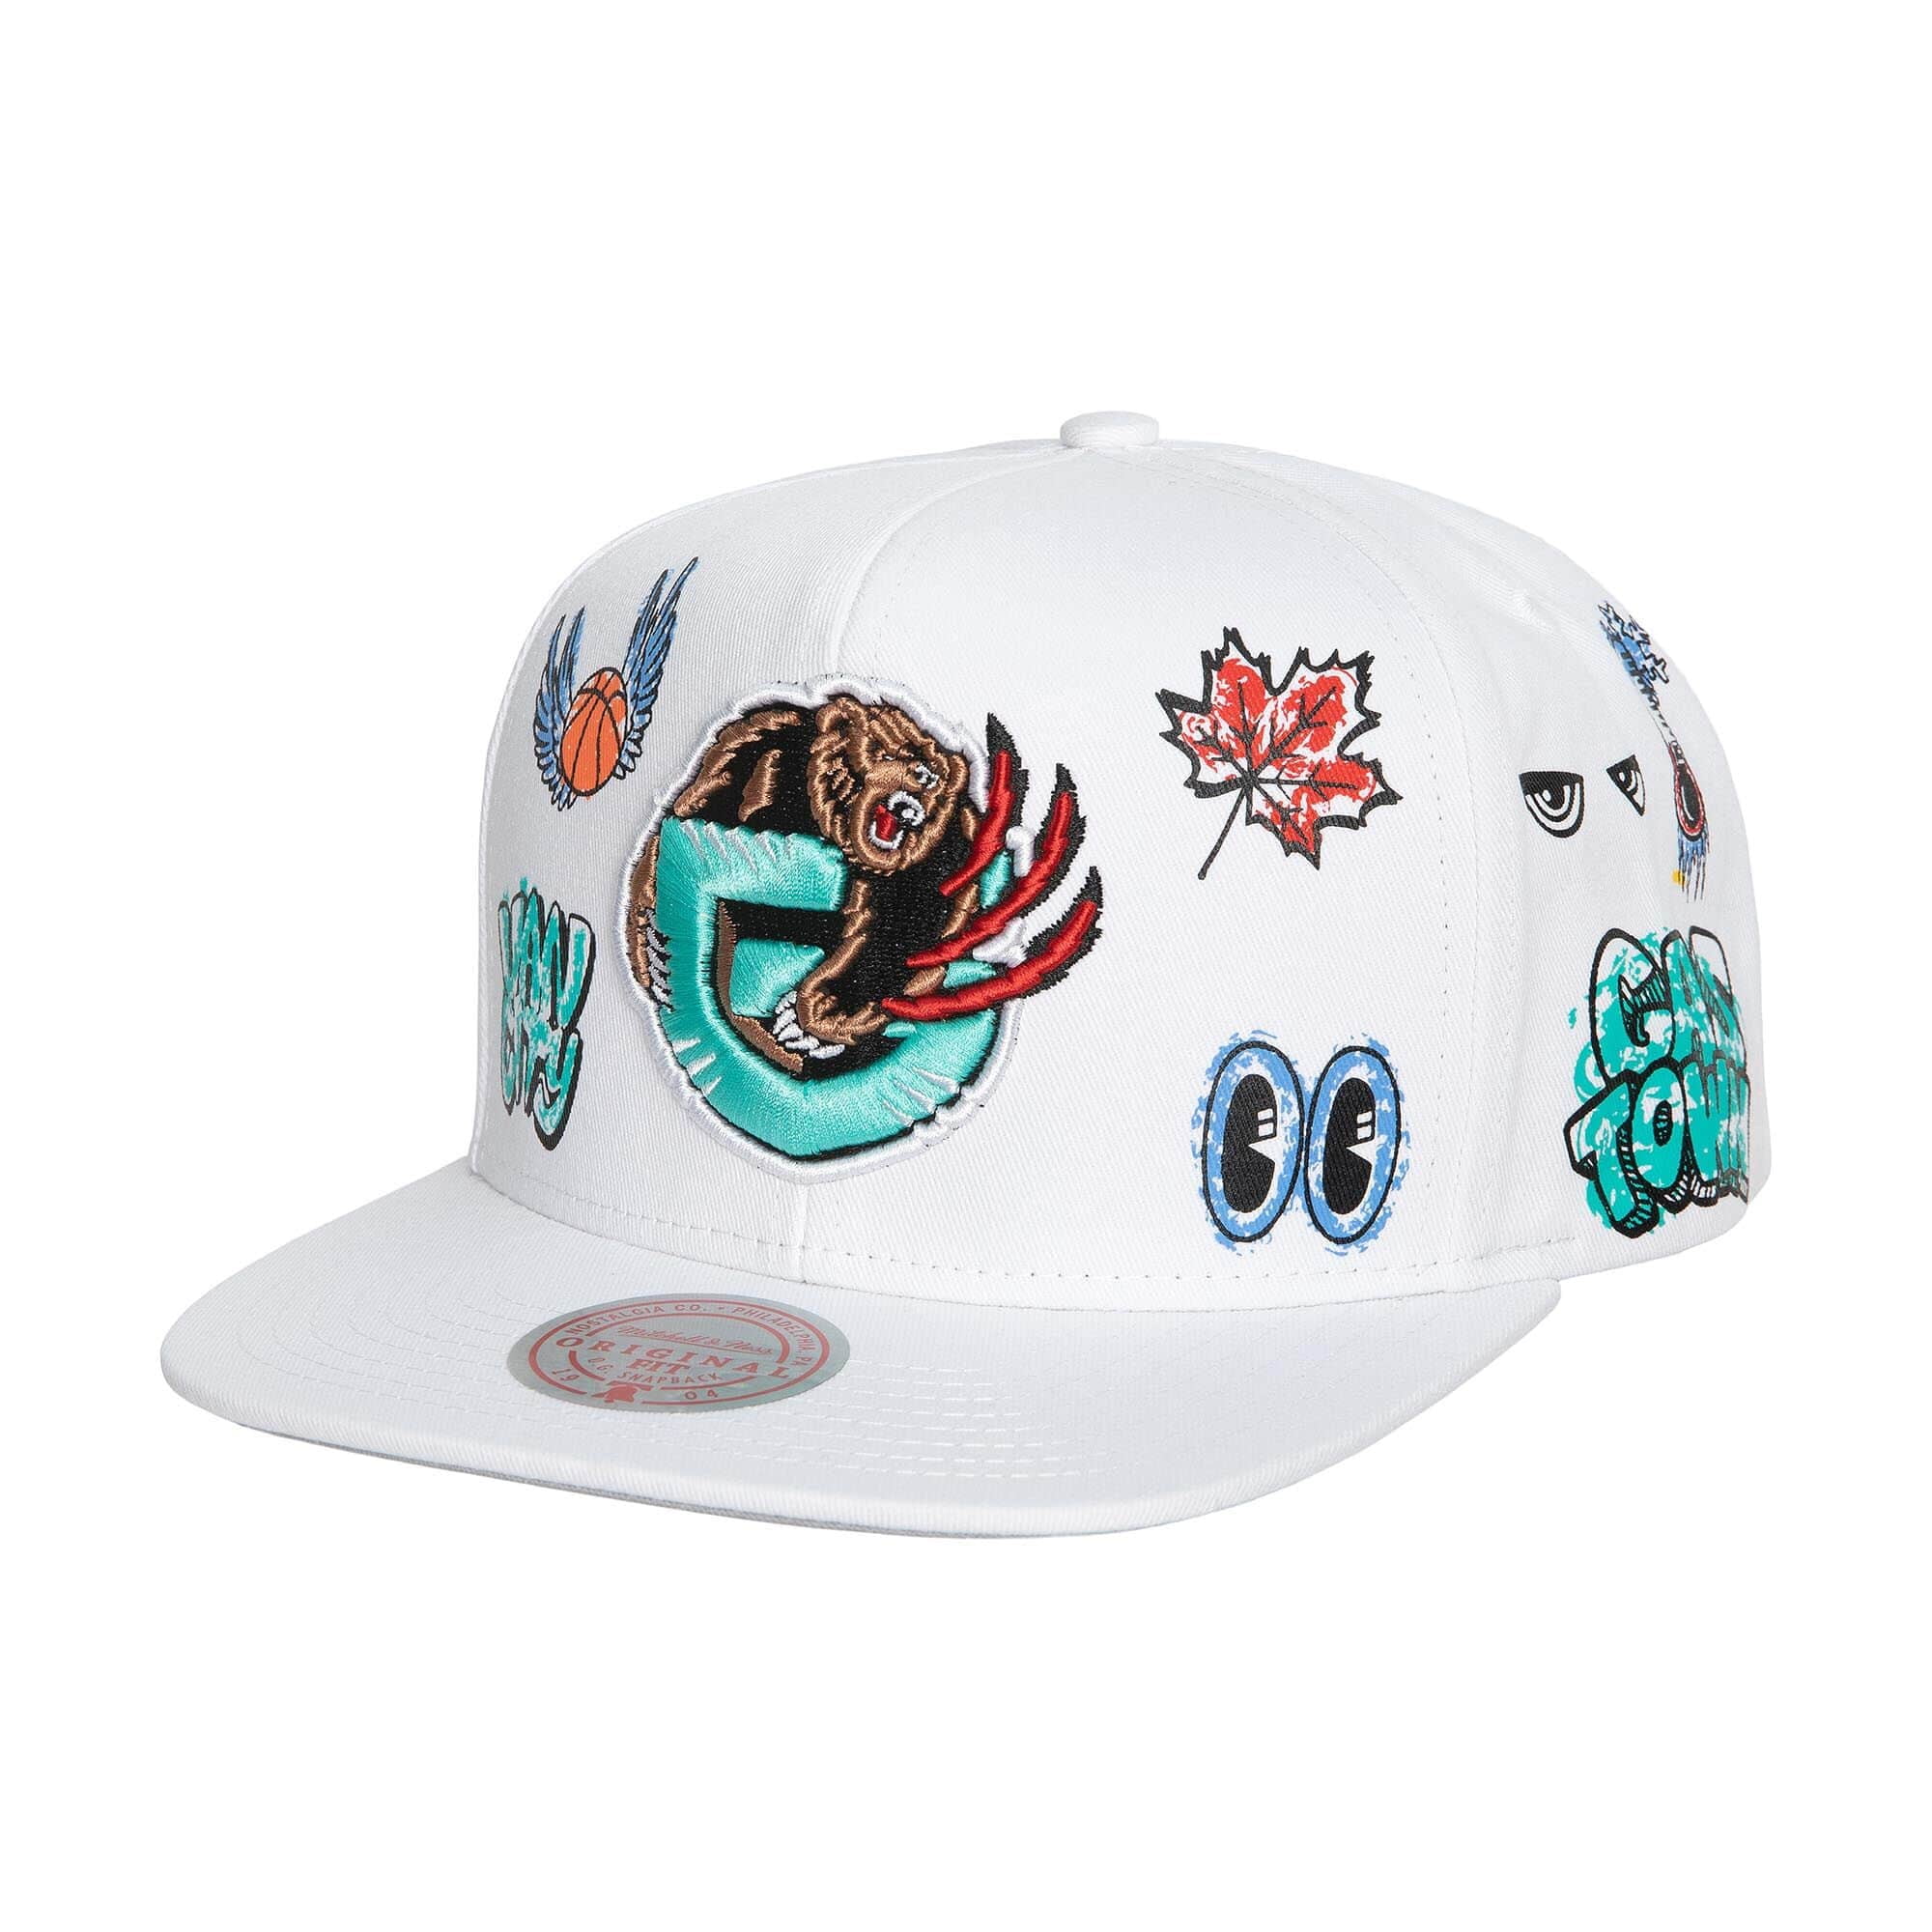 grizzlies mitchell and ness snapback